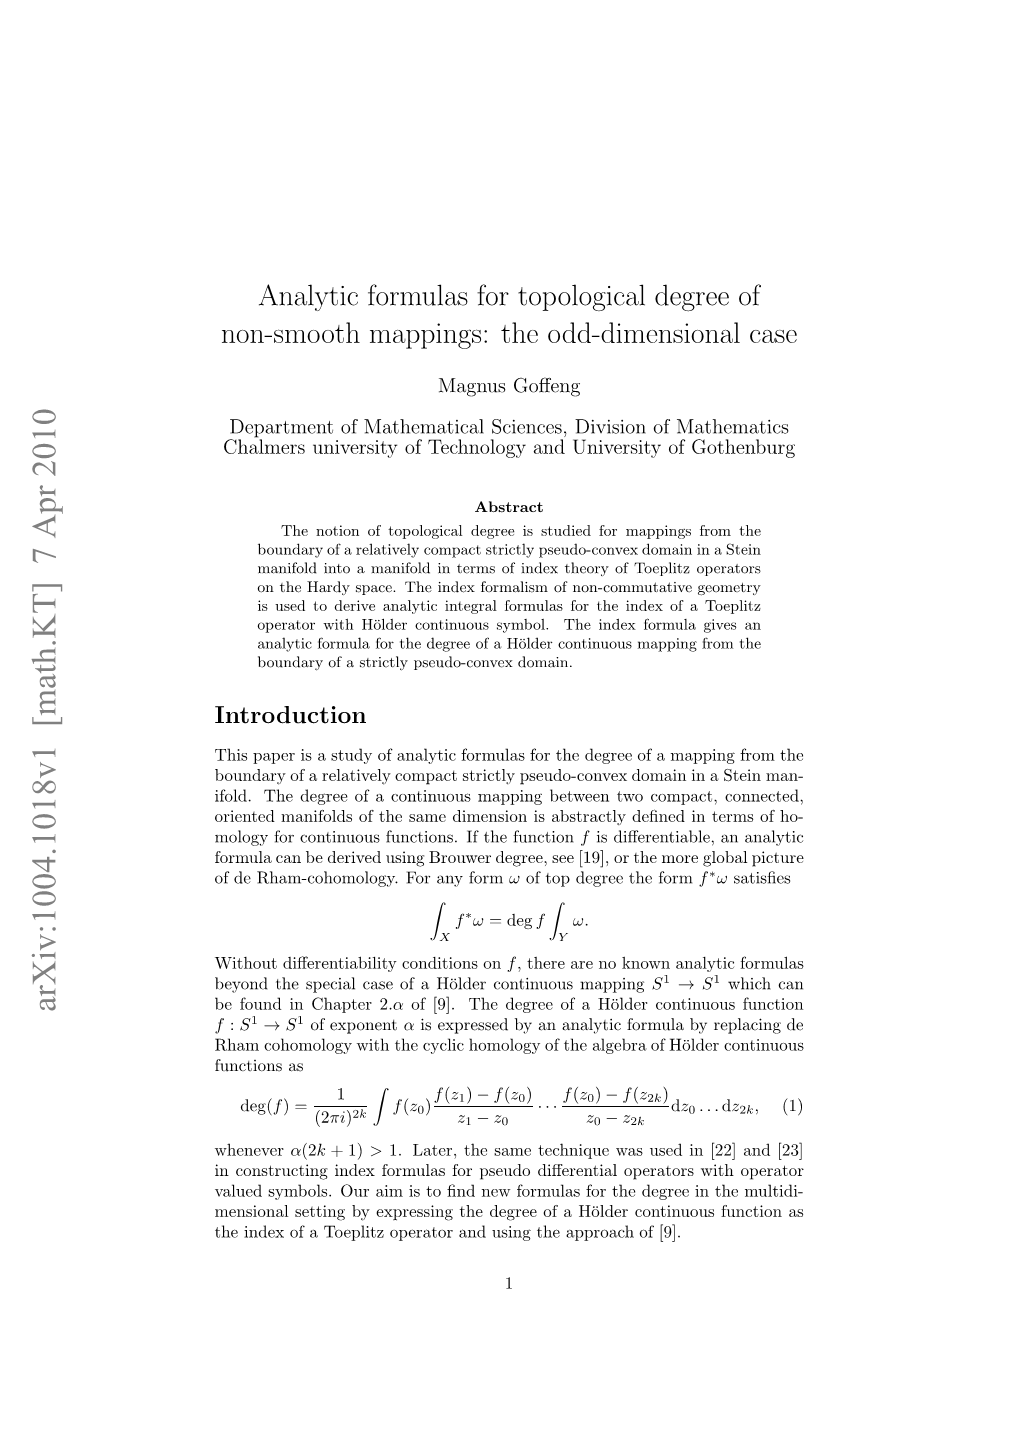 Analytic Formulas for Topological Degree of Non-Smooth Mappings